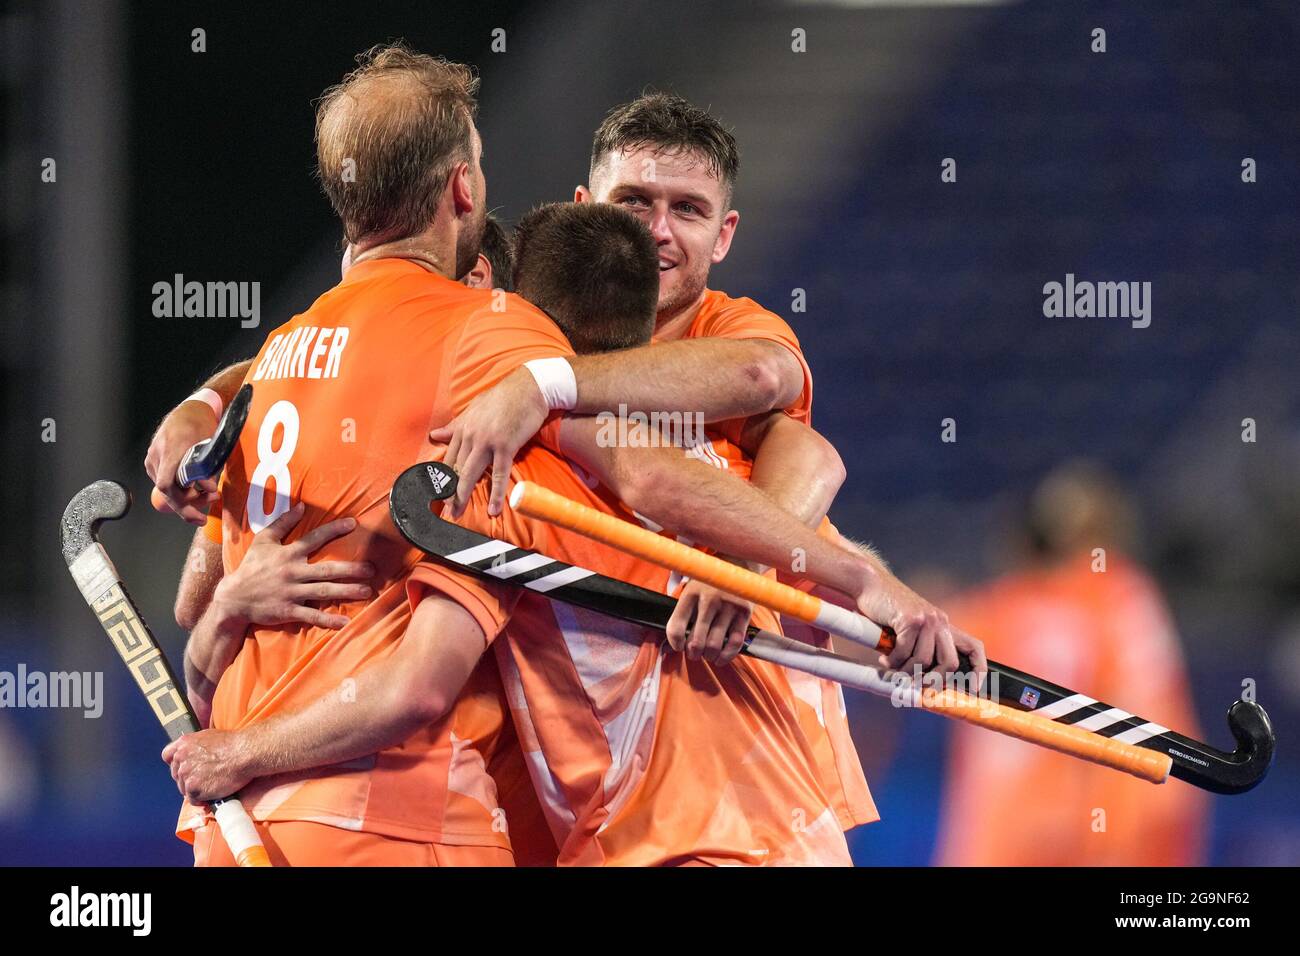 TOKYO, JAPAN - JULY 27: Thierry Brinkman of the Netherlands celebrates after scoring his sides second goal with Billy Bakker of the Netherlands competing on Men's Pool B during the Tokyo 2020 Olympic Games at the Oi Hockey Stadium on July 27, 2021 in Tokyo, Japan (Photo by Yannick Verhoeven/Orange Pictures) NOCNSF Stock Photo